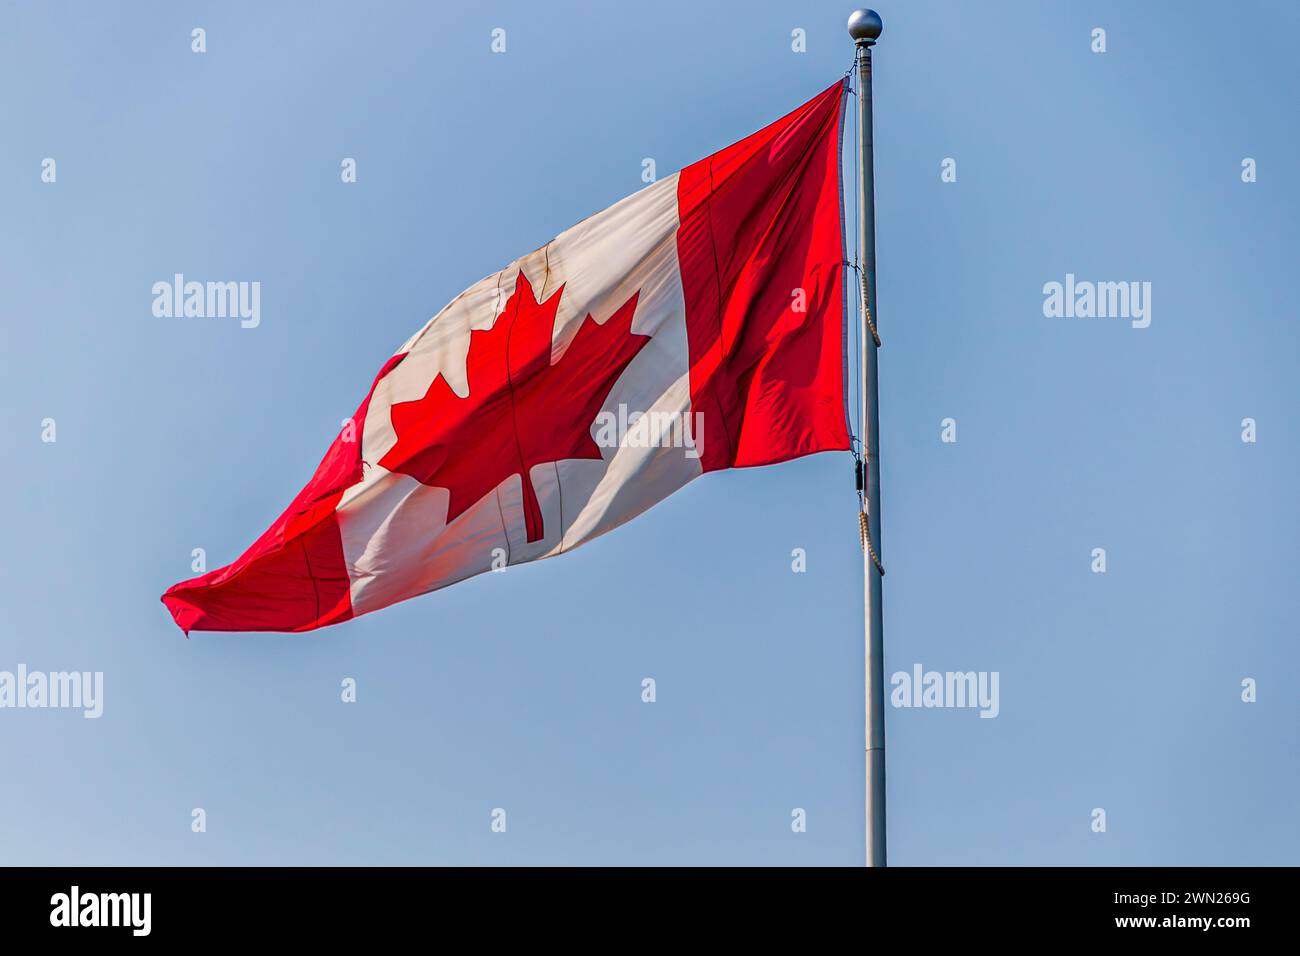 Waving Canadian flag against the blue sky Stock Photo